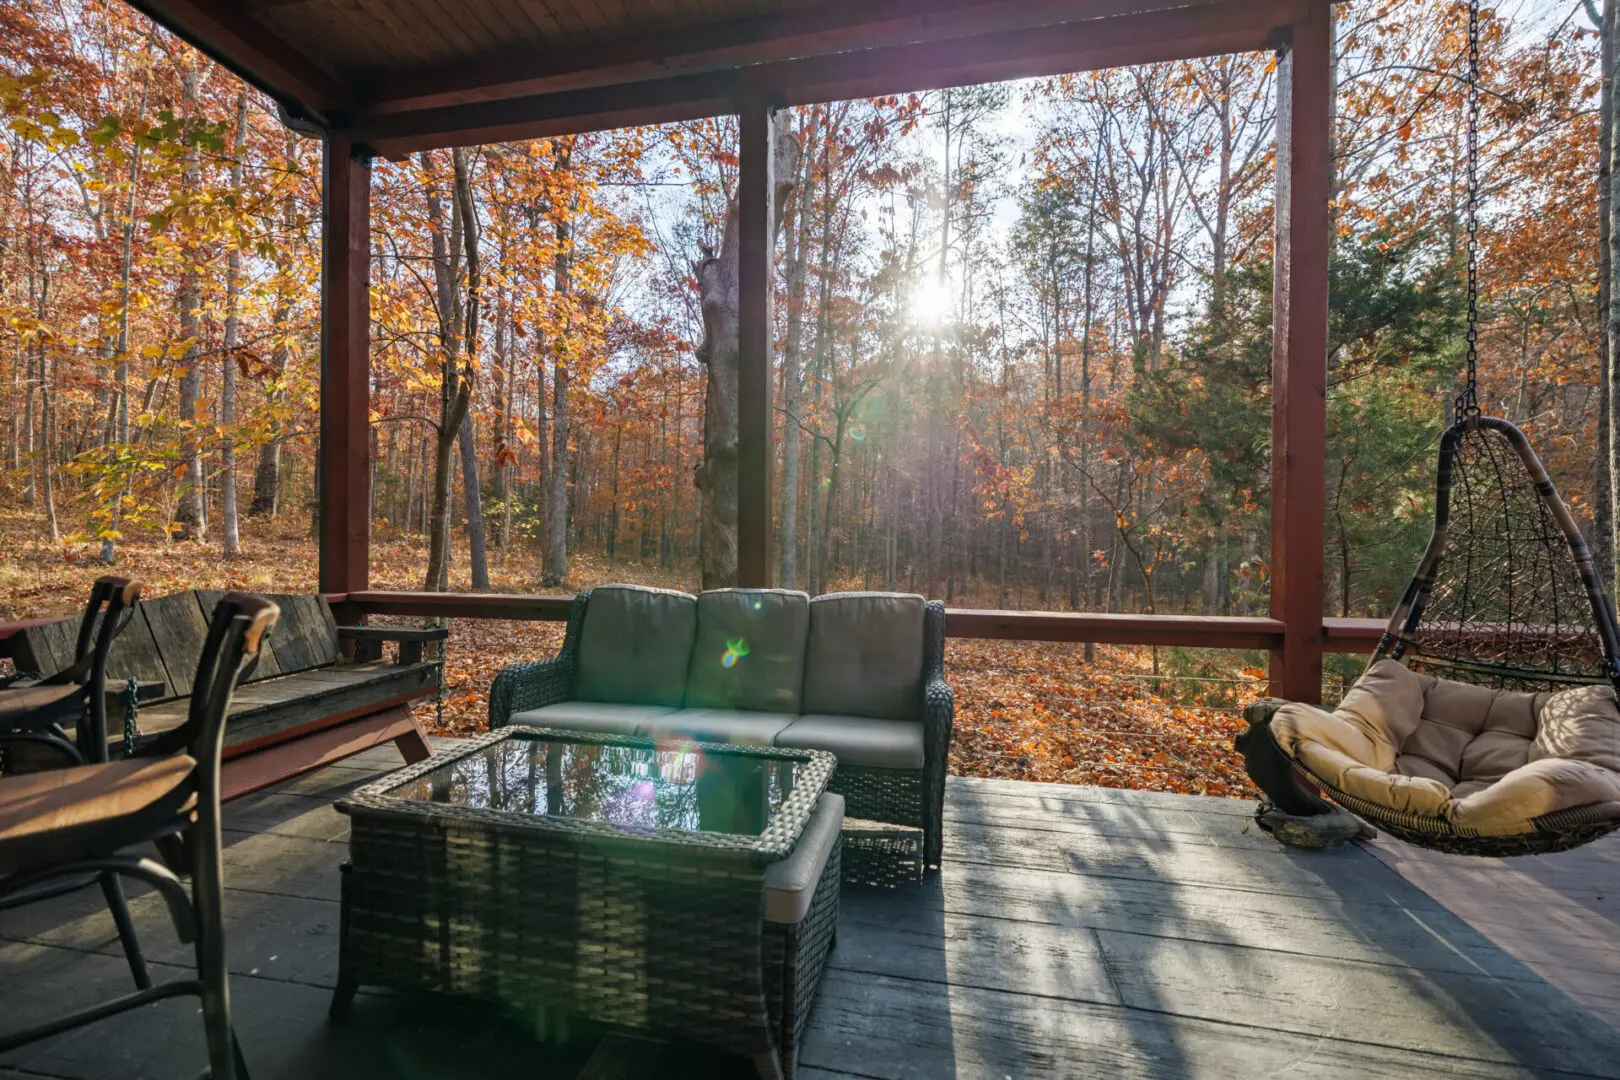 A Little River Point porch with a swing, offering a tranquil view of the woods.